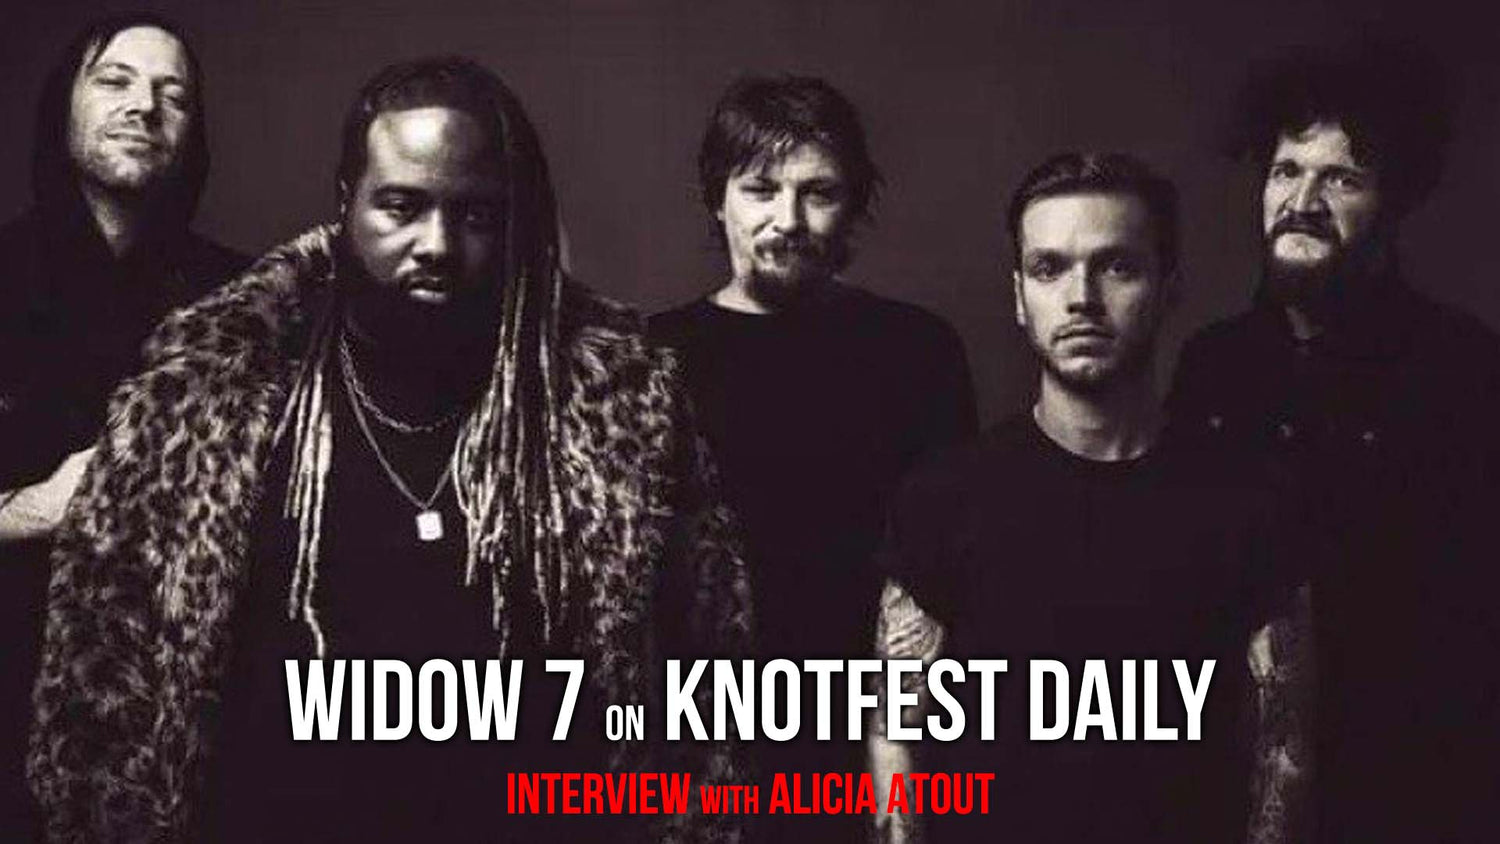 Widow 7 Interview: Knotfest Iowa, Geeking Out Backstage & More